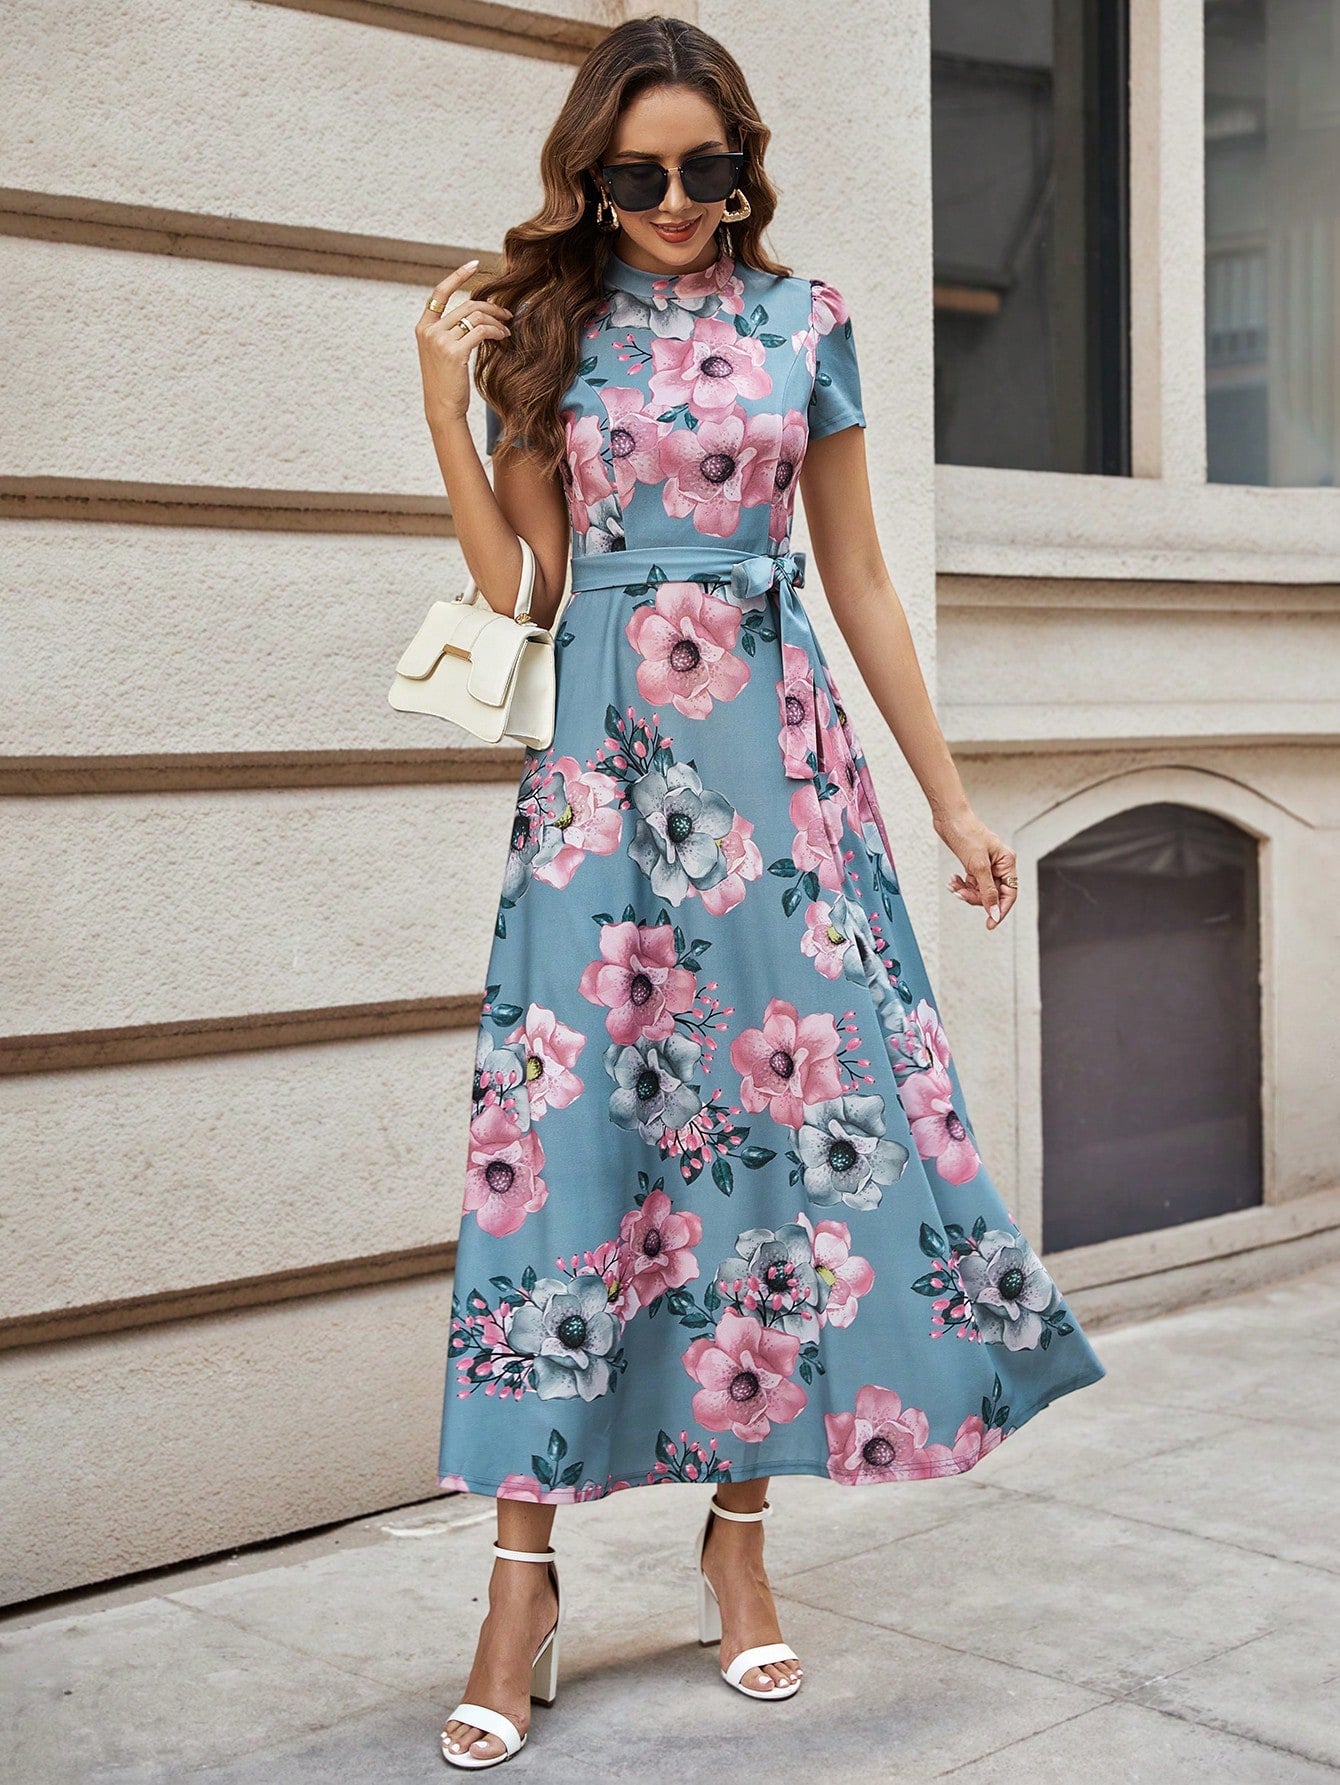 SHEIN Clasi Floral Print Belted Dress